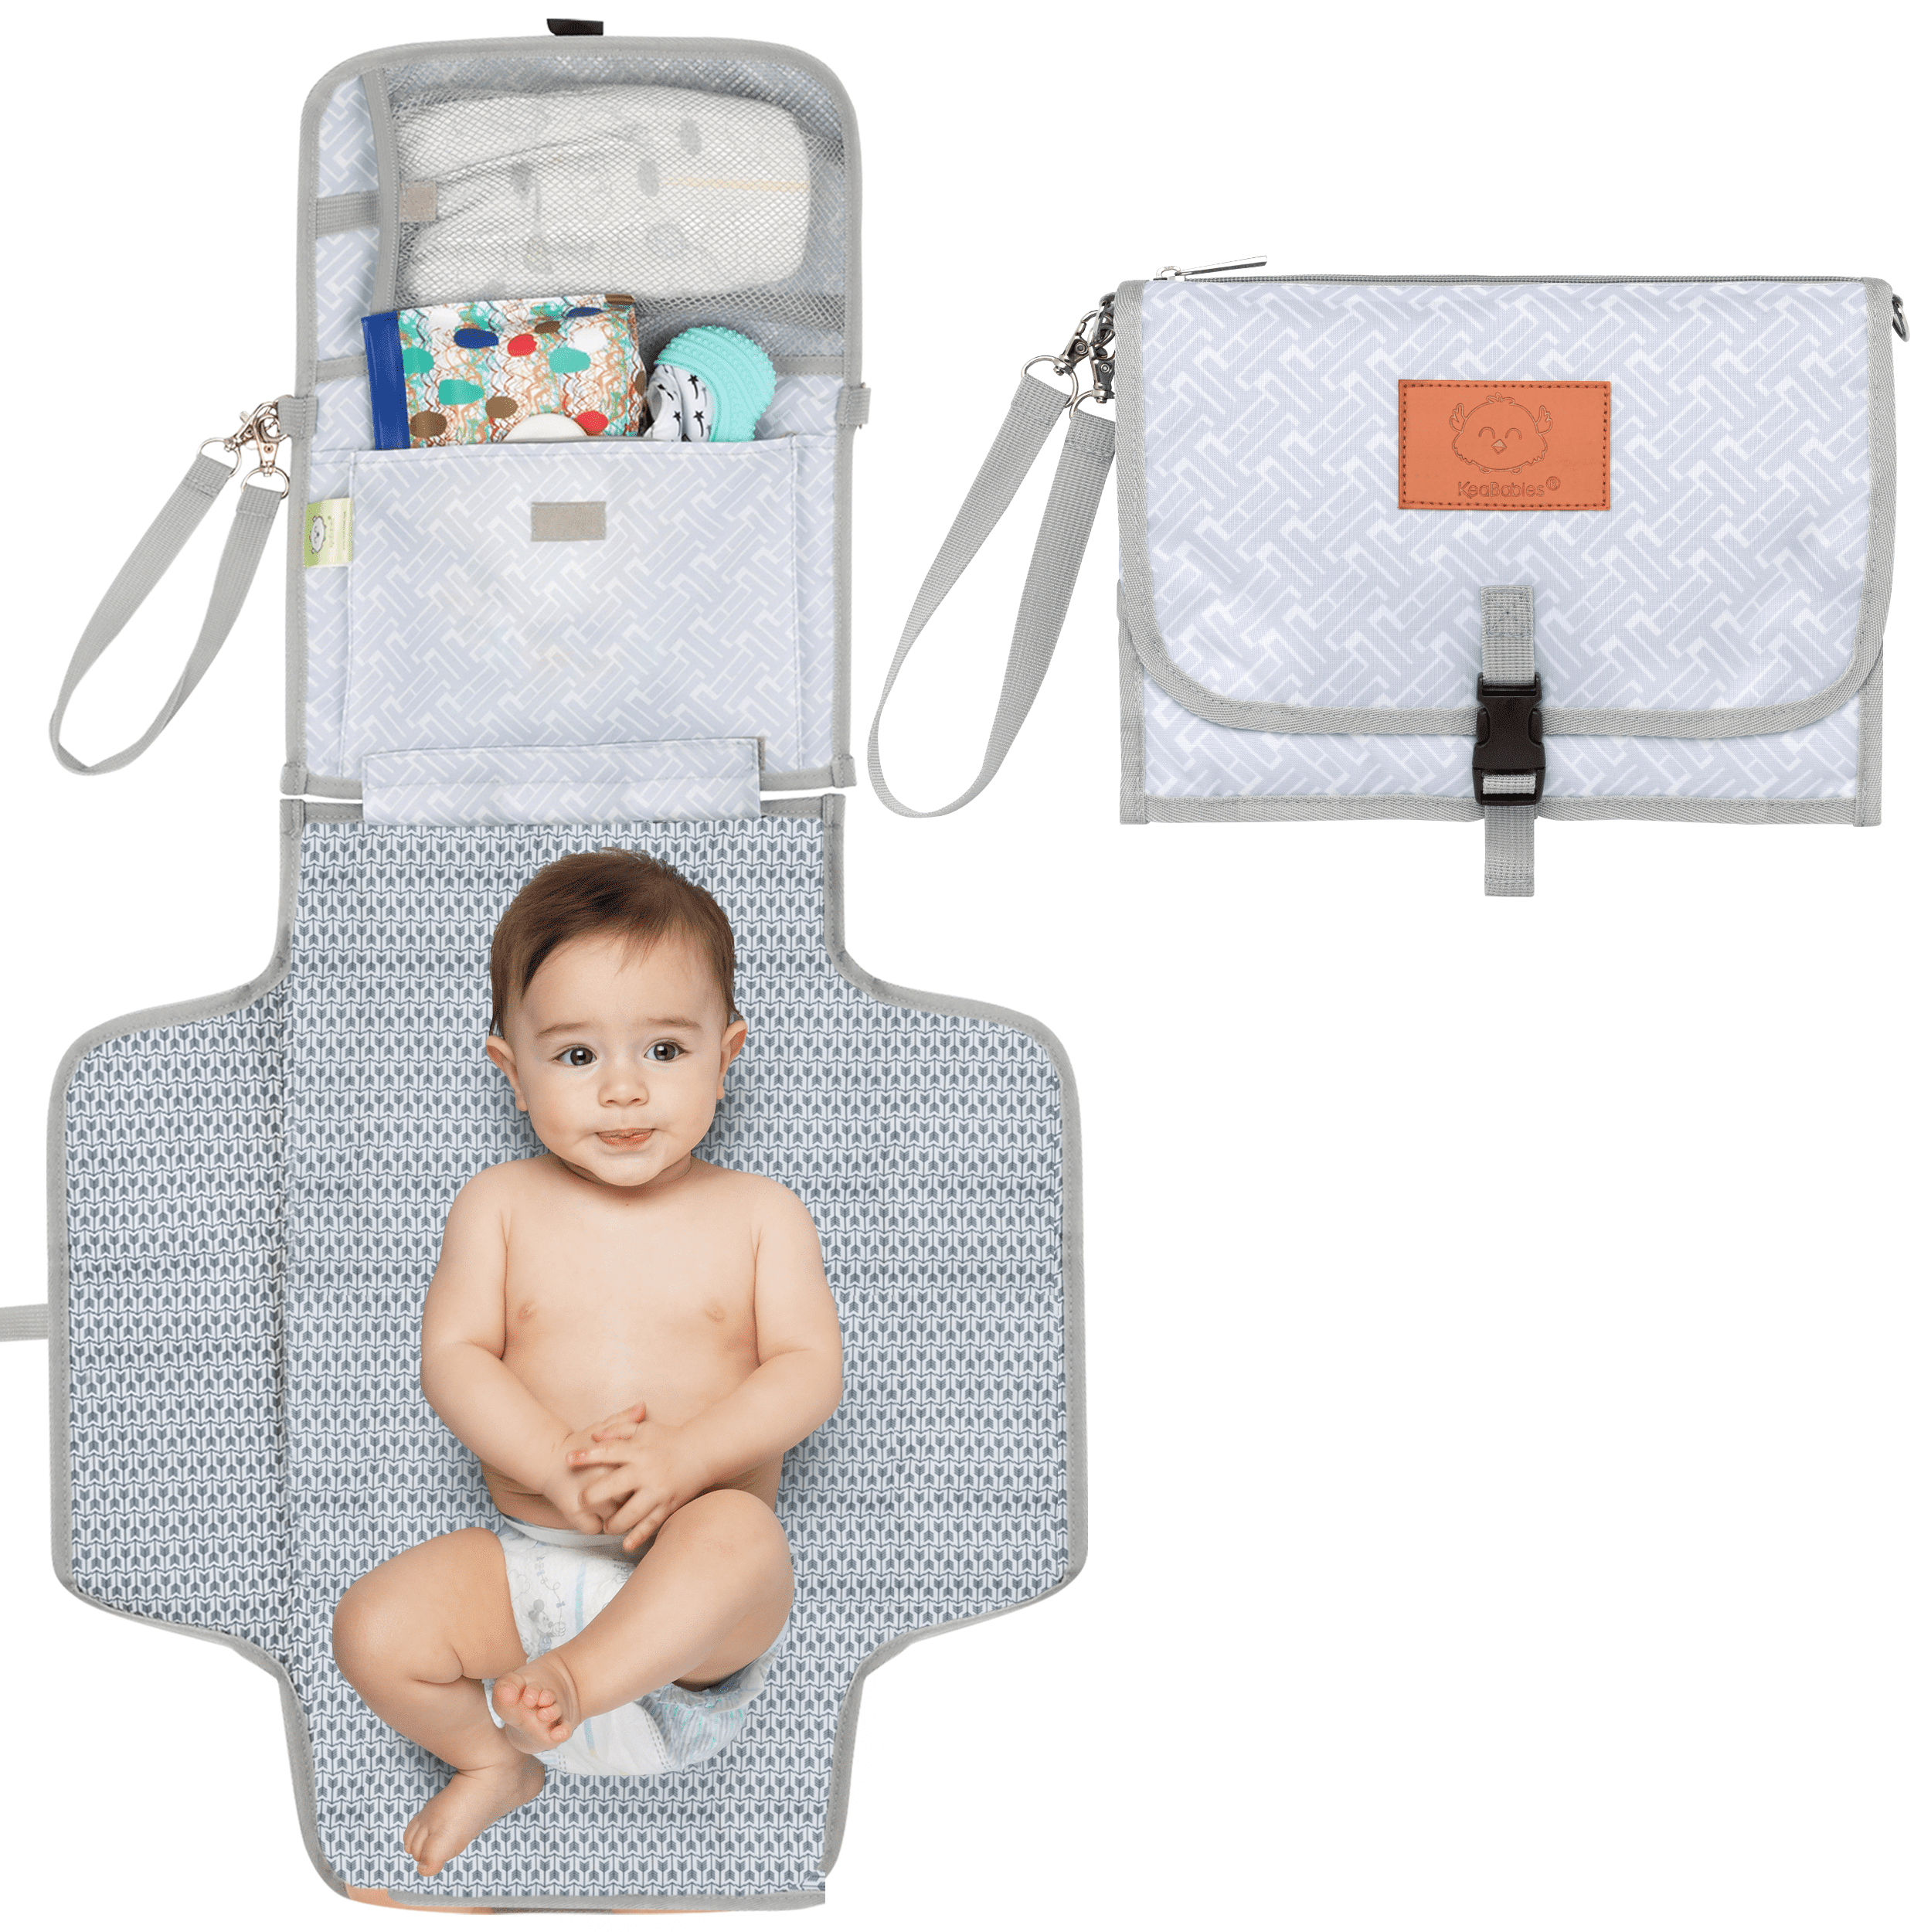 Portable Nappy Changing Mat Waterproof Baby Changing Mat Wipeable Lightweight Travel Nappy Bag Diapper Changing Pad for Infant Toddlers Great Gift